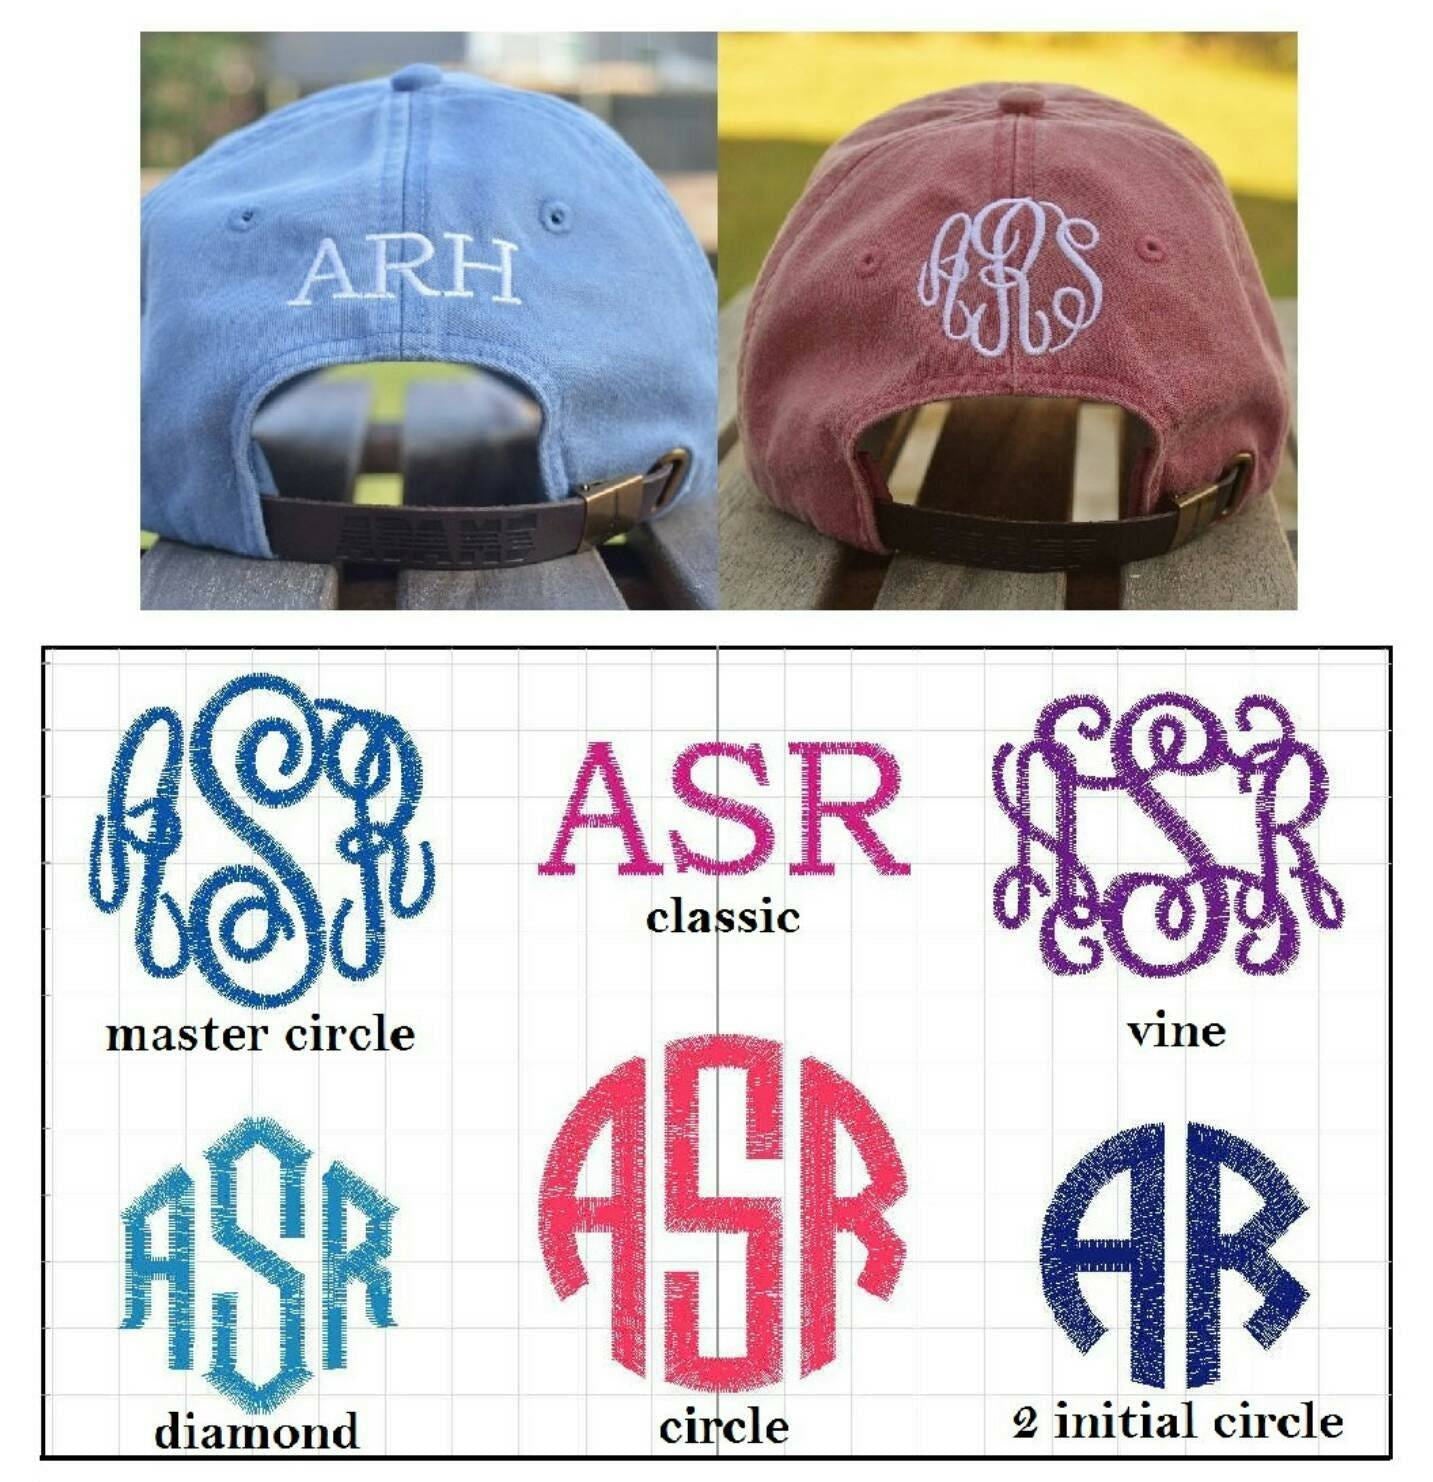 Football MOM Hat - sports, football, quarterback, touchdown, boy mom embroidered trucker or baseball hat, can be personalized or monogrammed